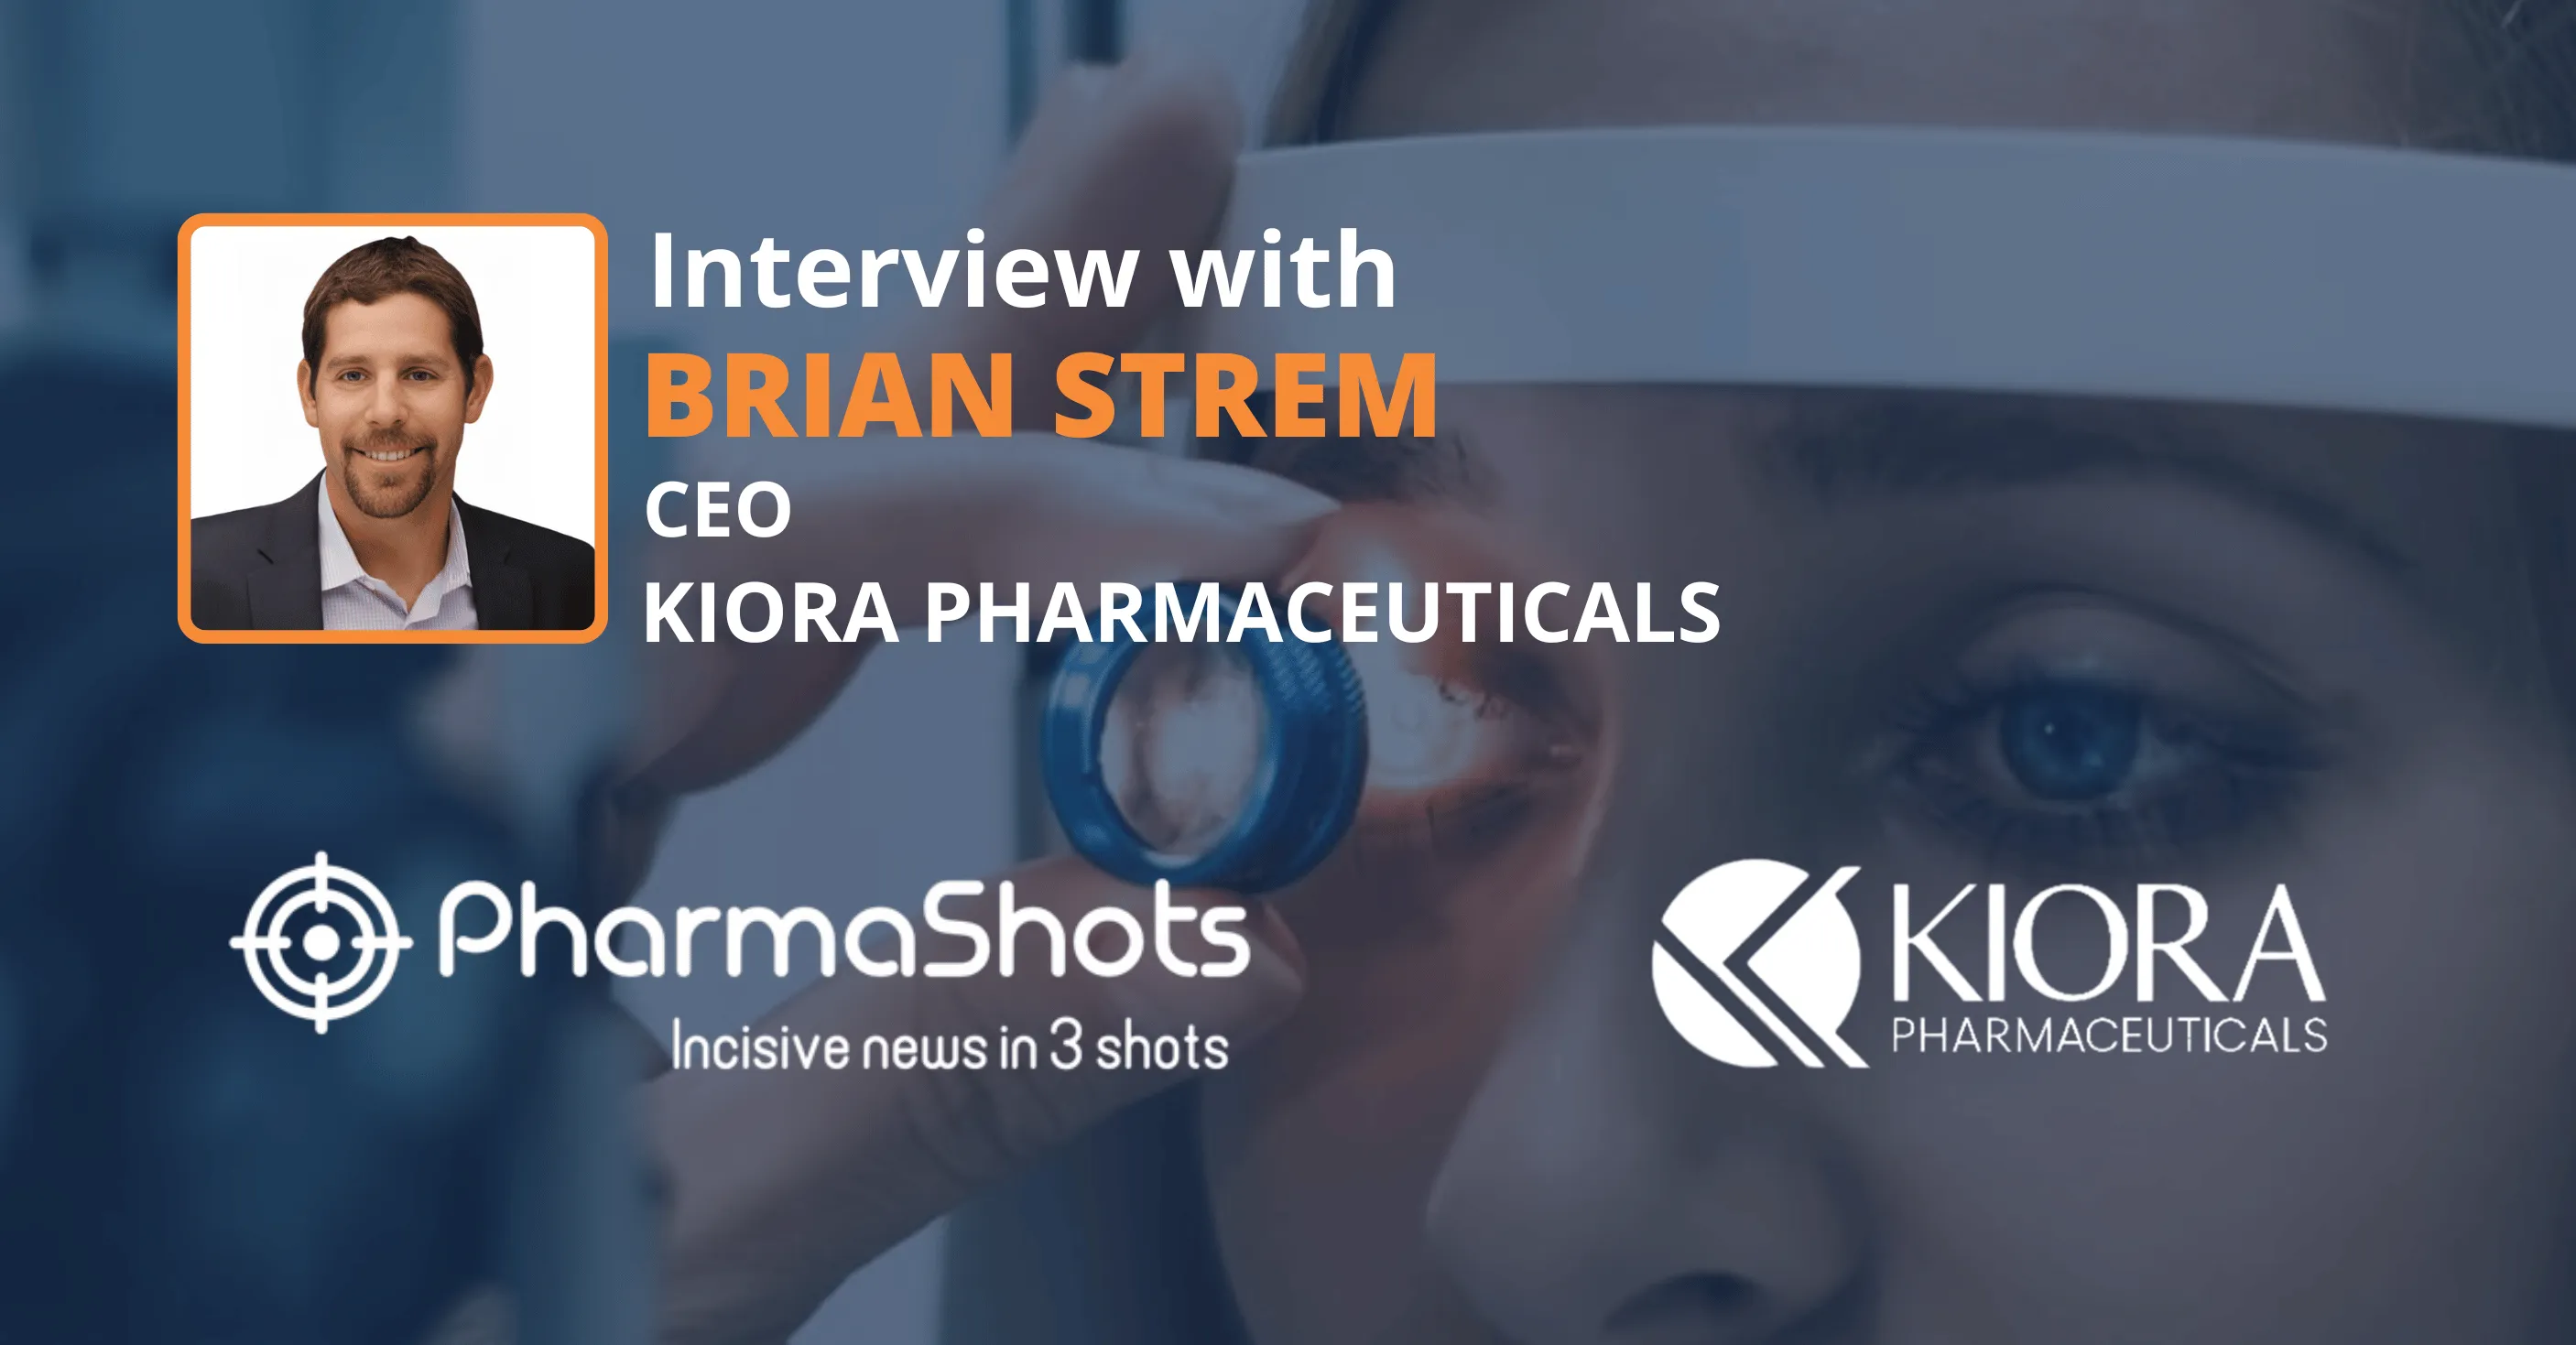 Inherited Retinal Disease Management: Brian Strem from Kiora Pharmaceuticals in a Stimulating Dialogue Exchange with PharmaShots